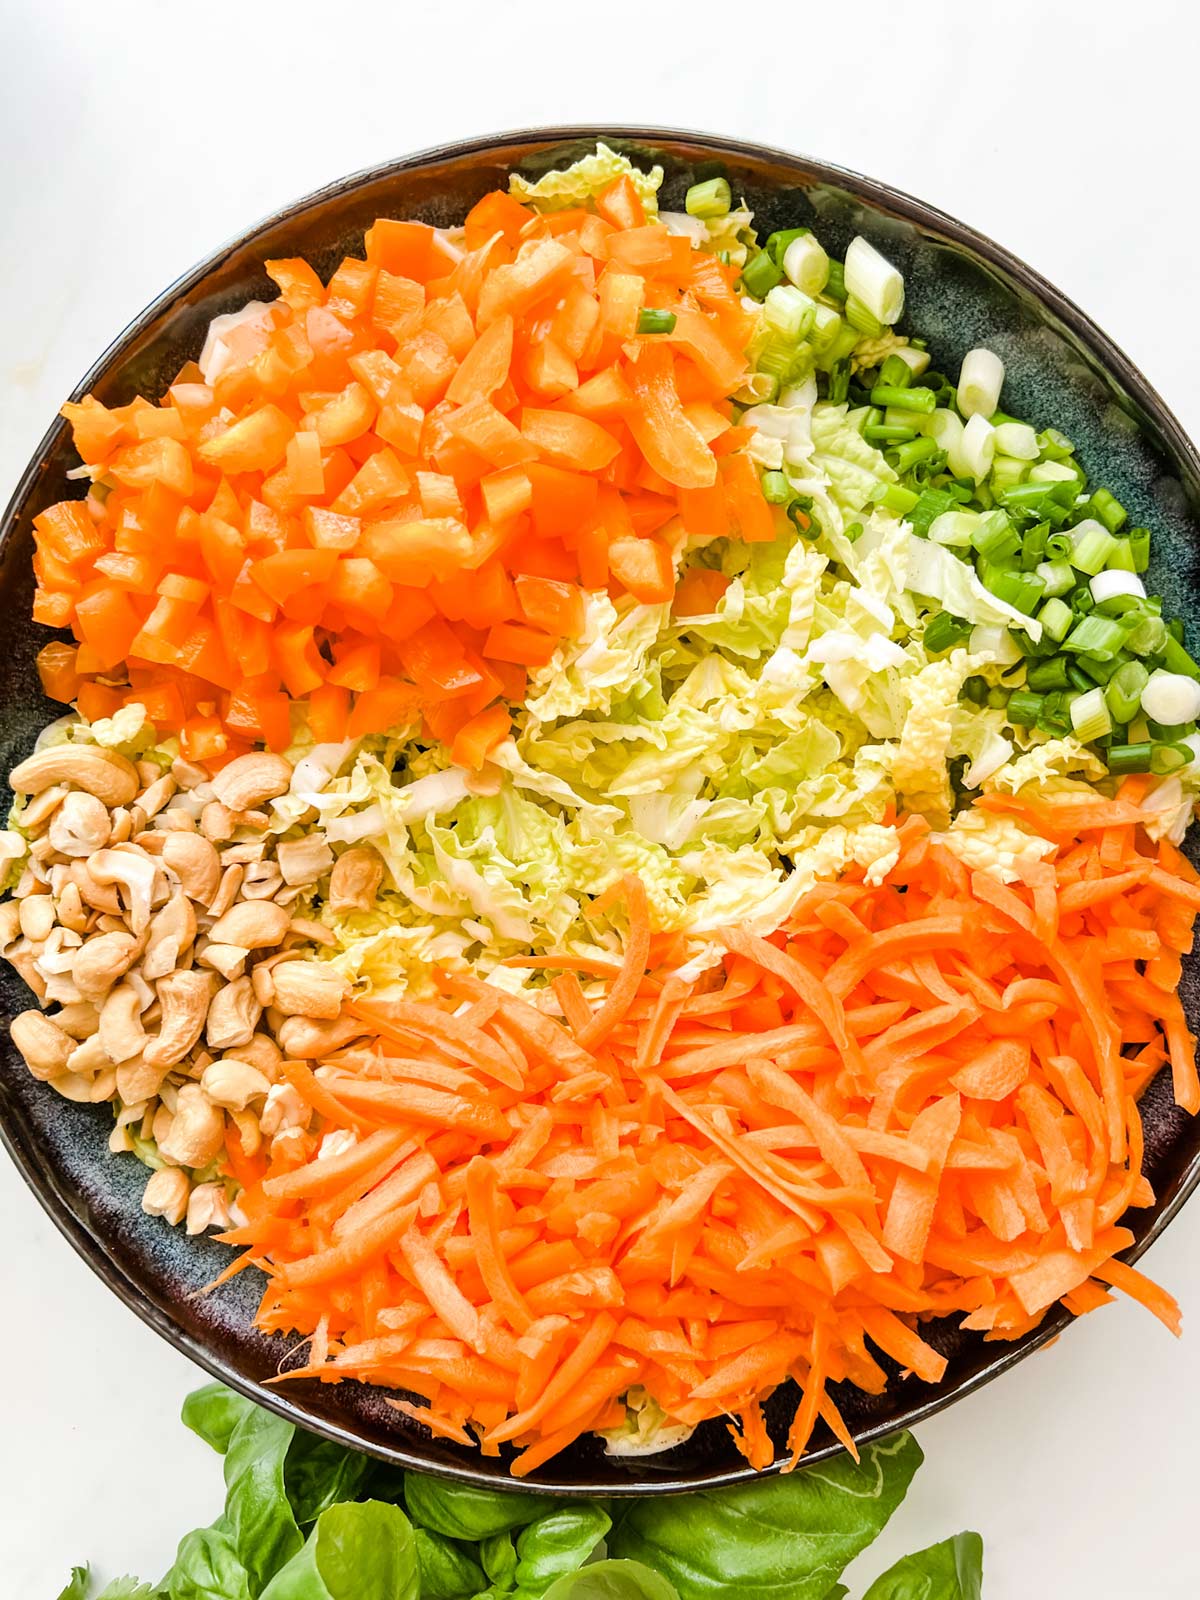 Chopped napa cabbage, bell pepper, green onion, carrots, and cashews in a large blue bowl.